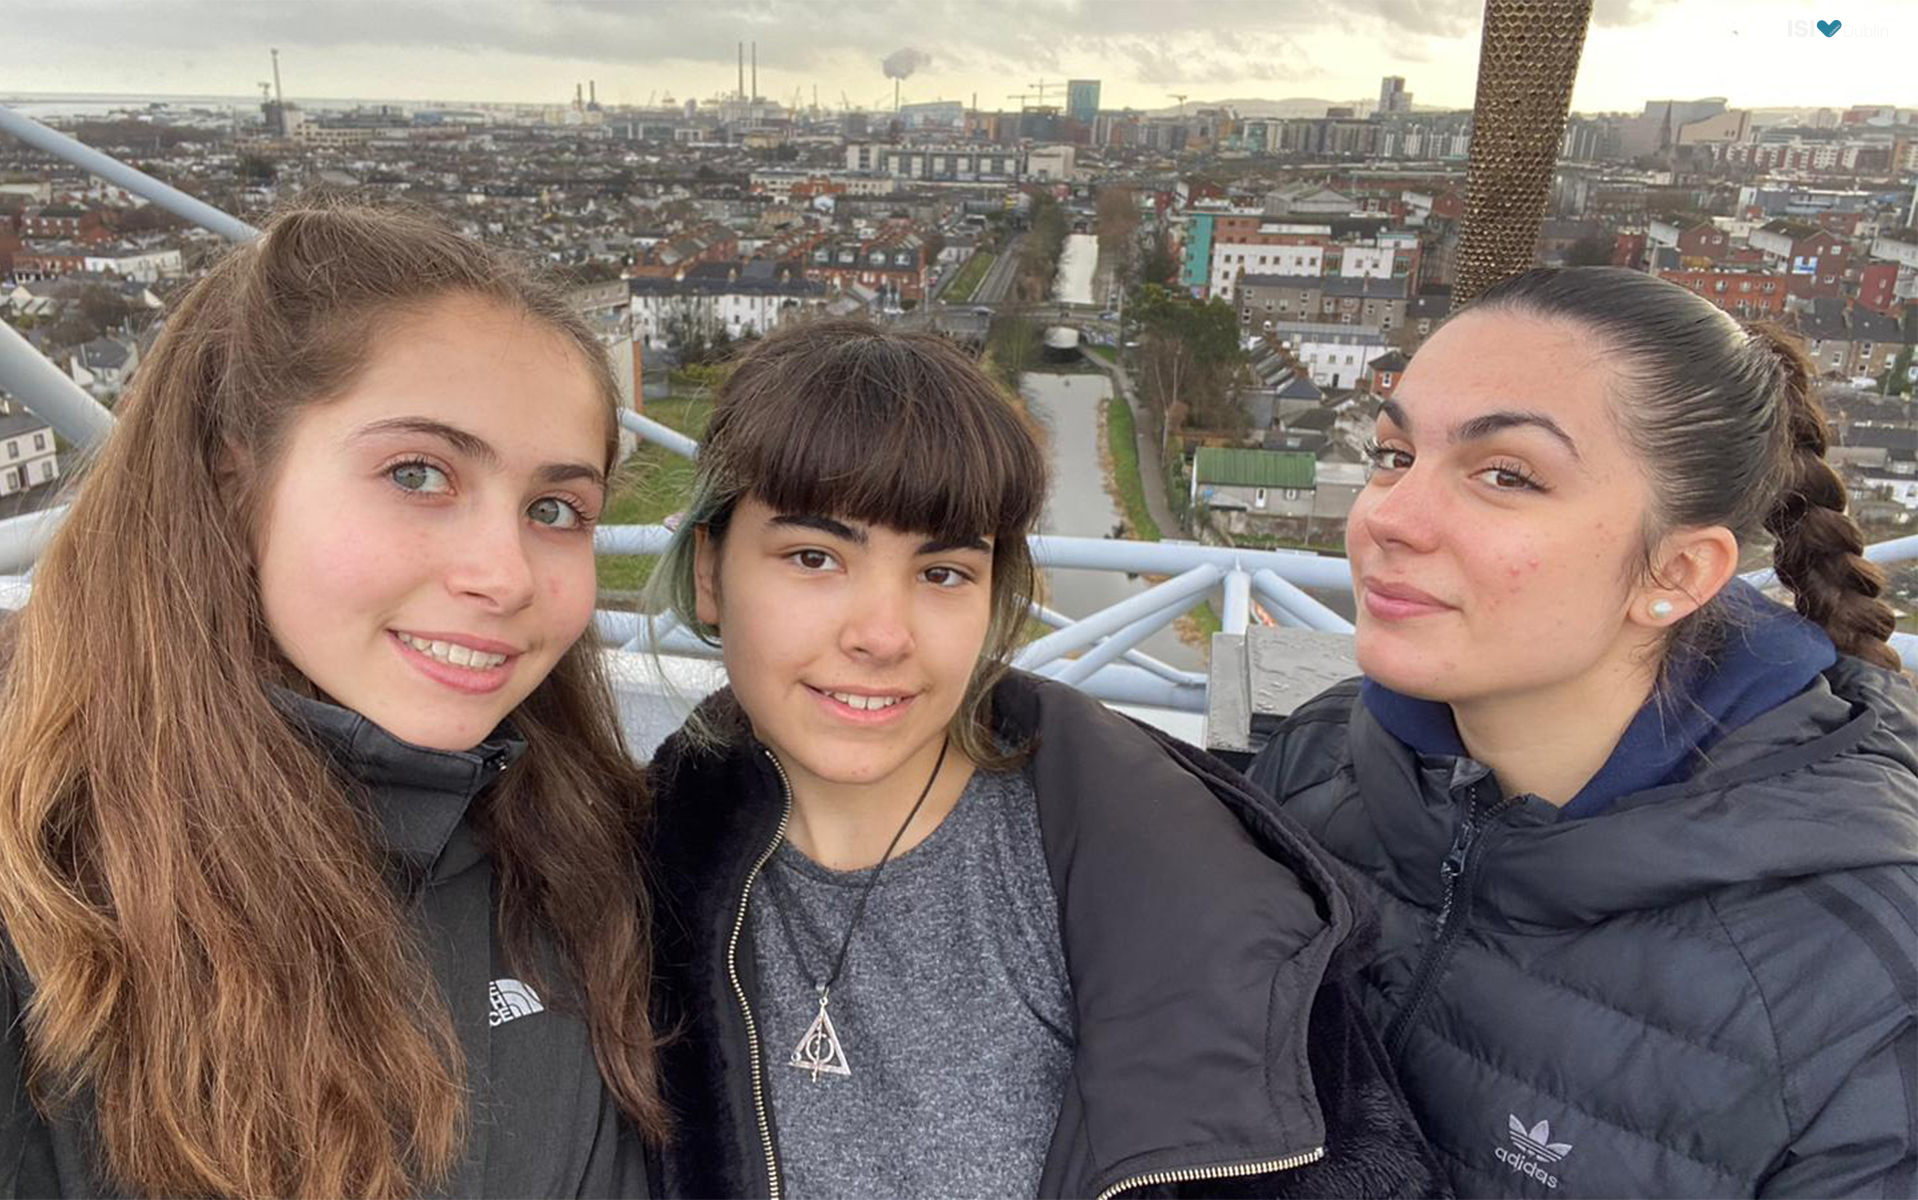 Clara, Laia and Noa taking in the views of the city